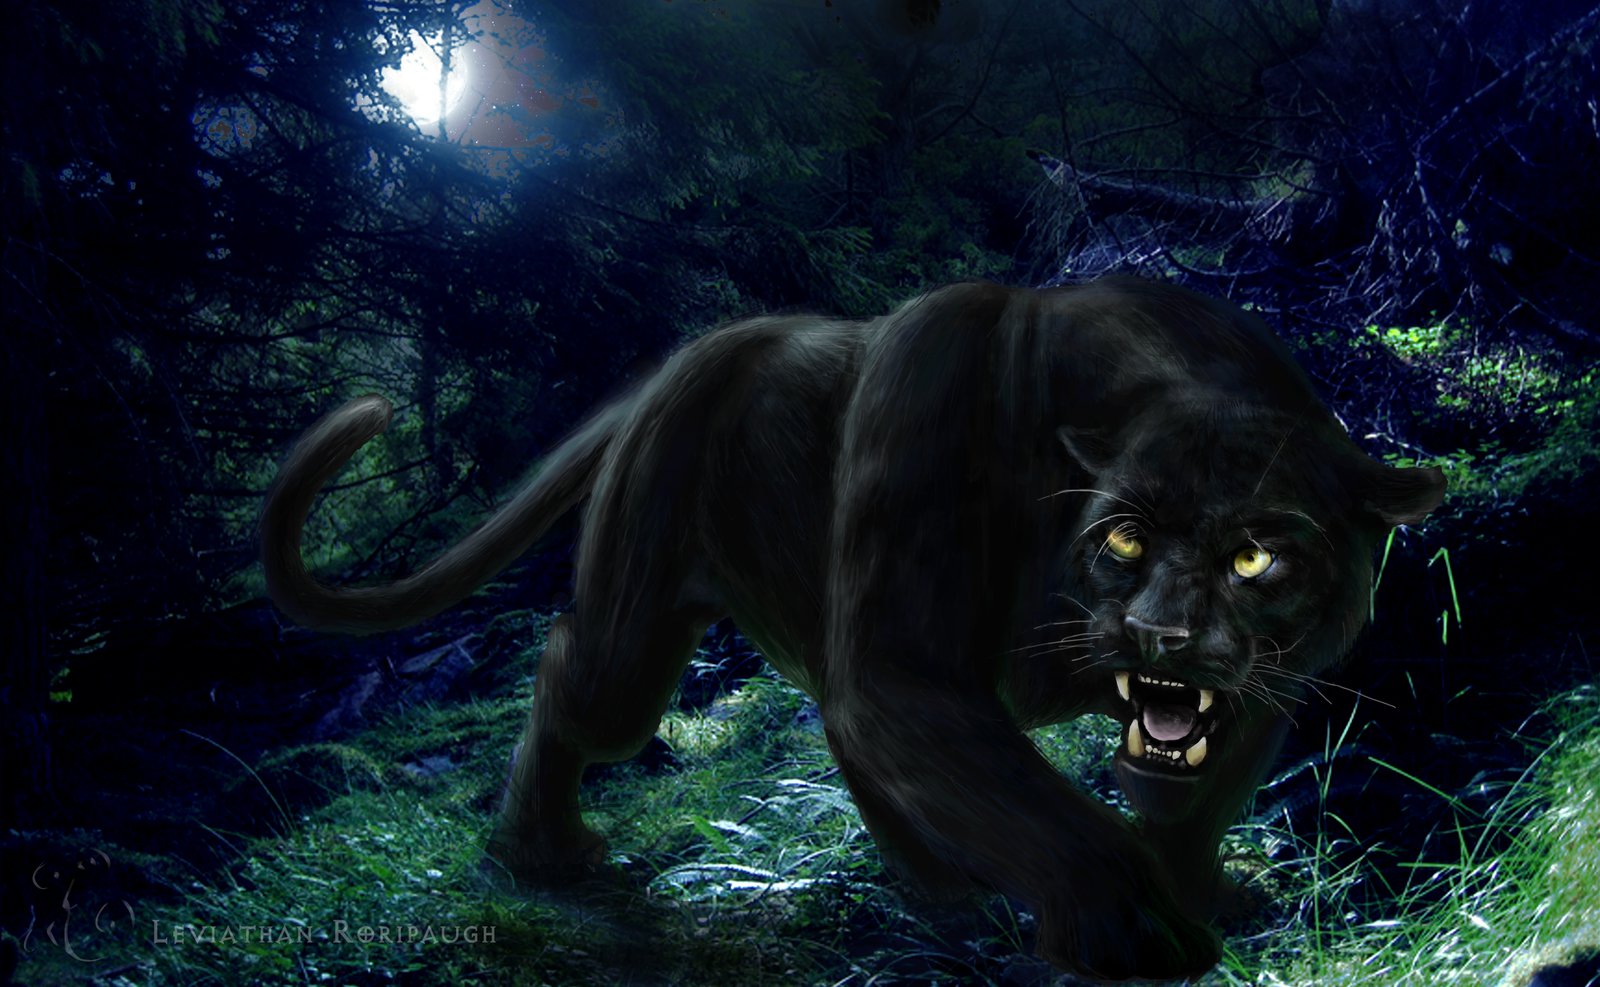 Black_Panther_in_Forest_by_sayjinlink.jpg